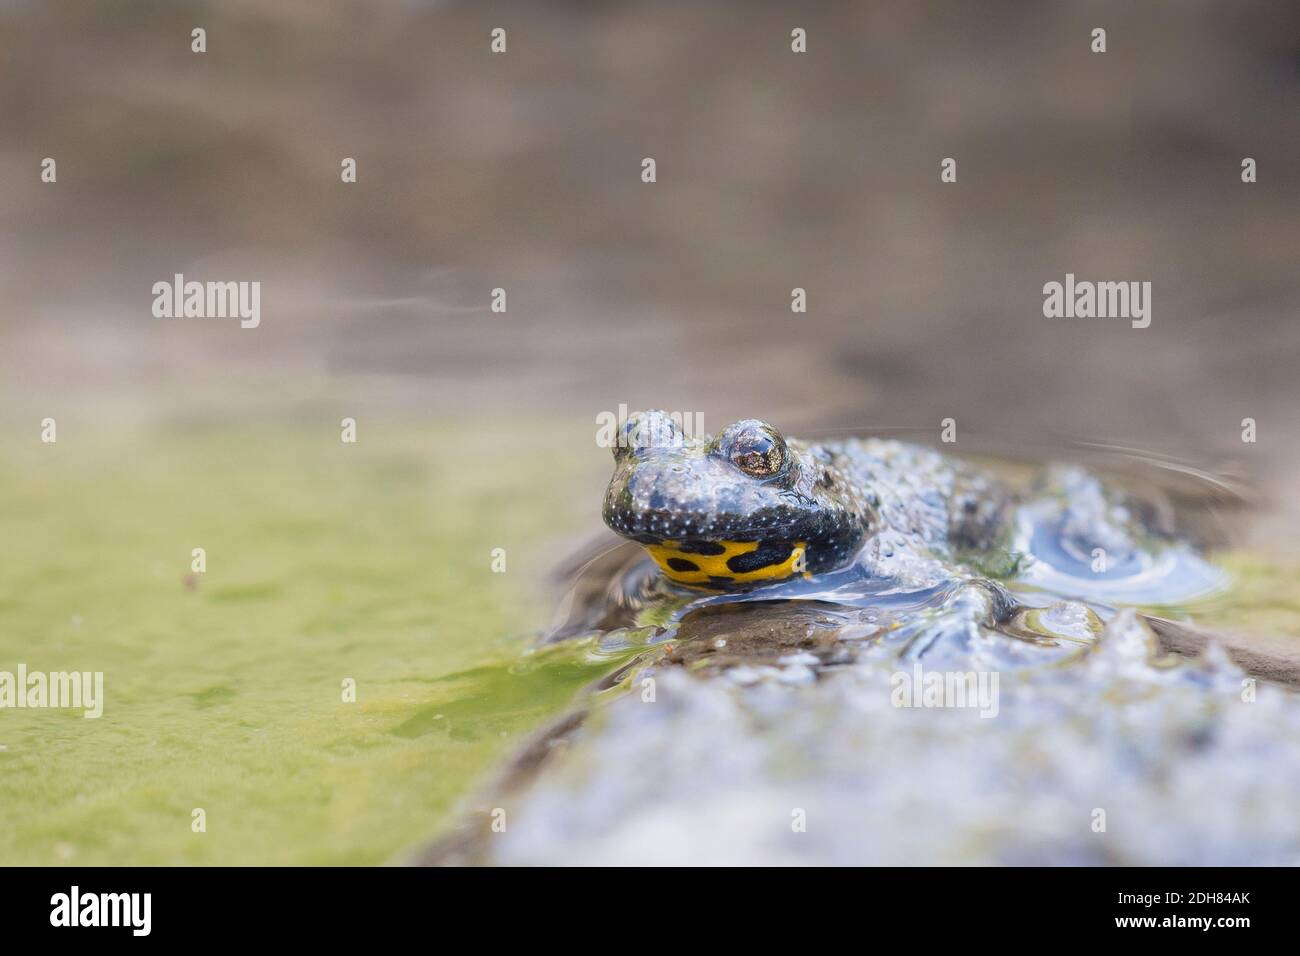 yellow-bellied toad, yellowbelly toad, variegated fire-toad (Bombina variegata), sits in shallow water, Germany Stock Photo